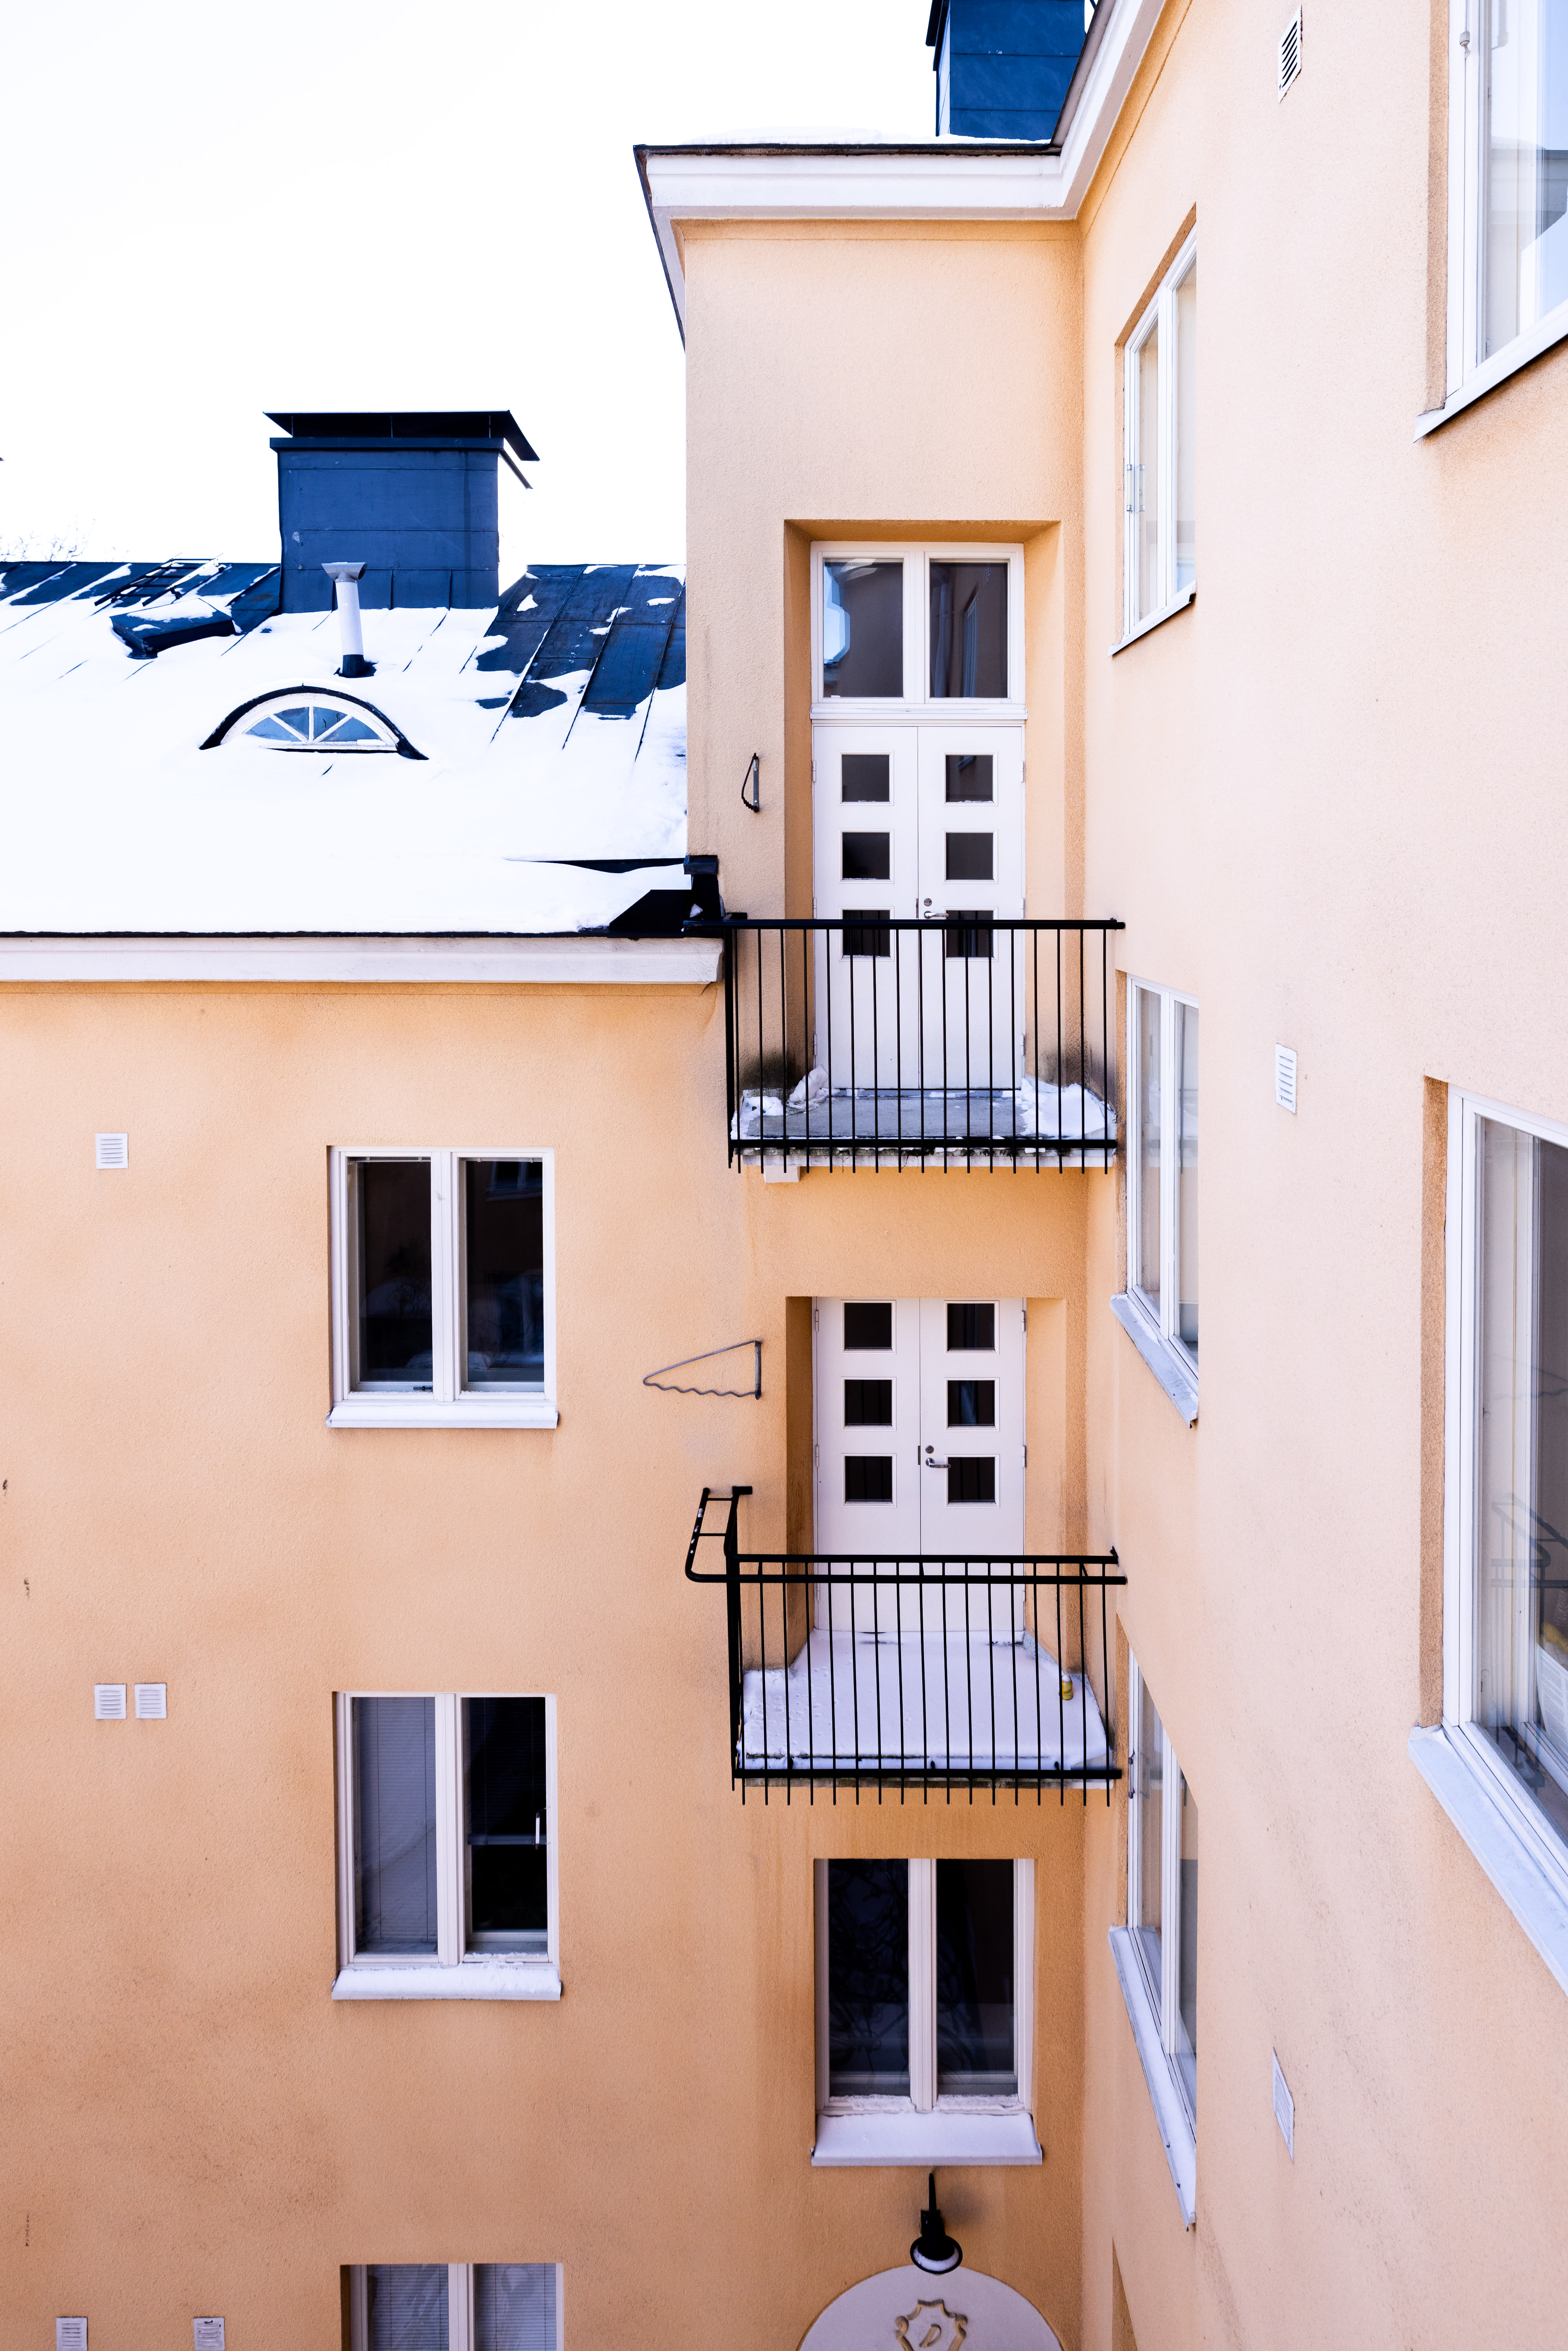 Finland can support interest subsidies for thousands of first-time home buyers